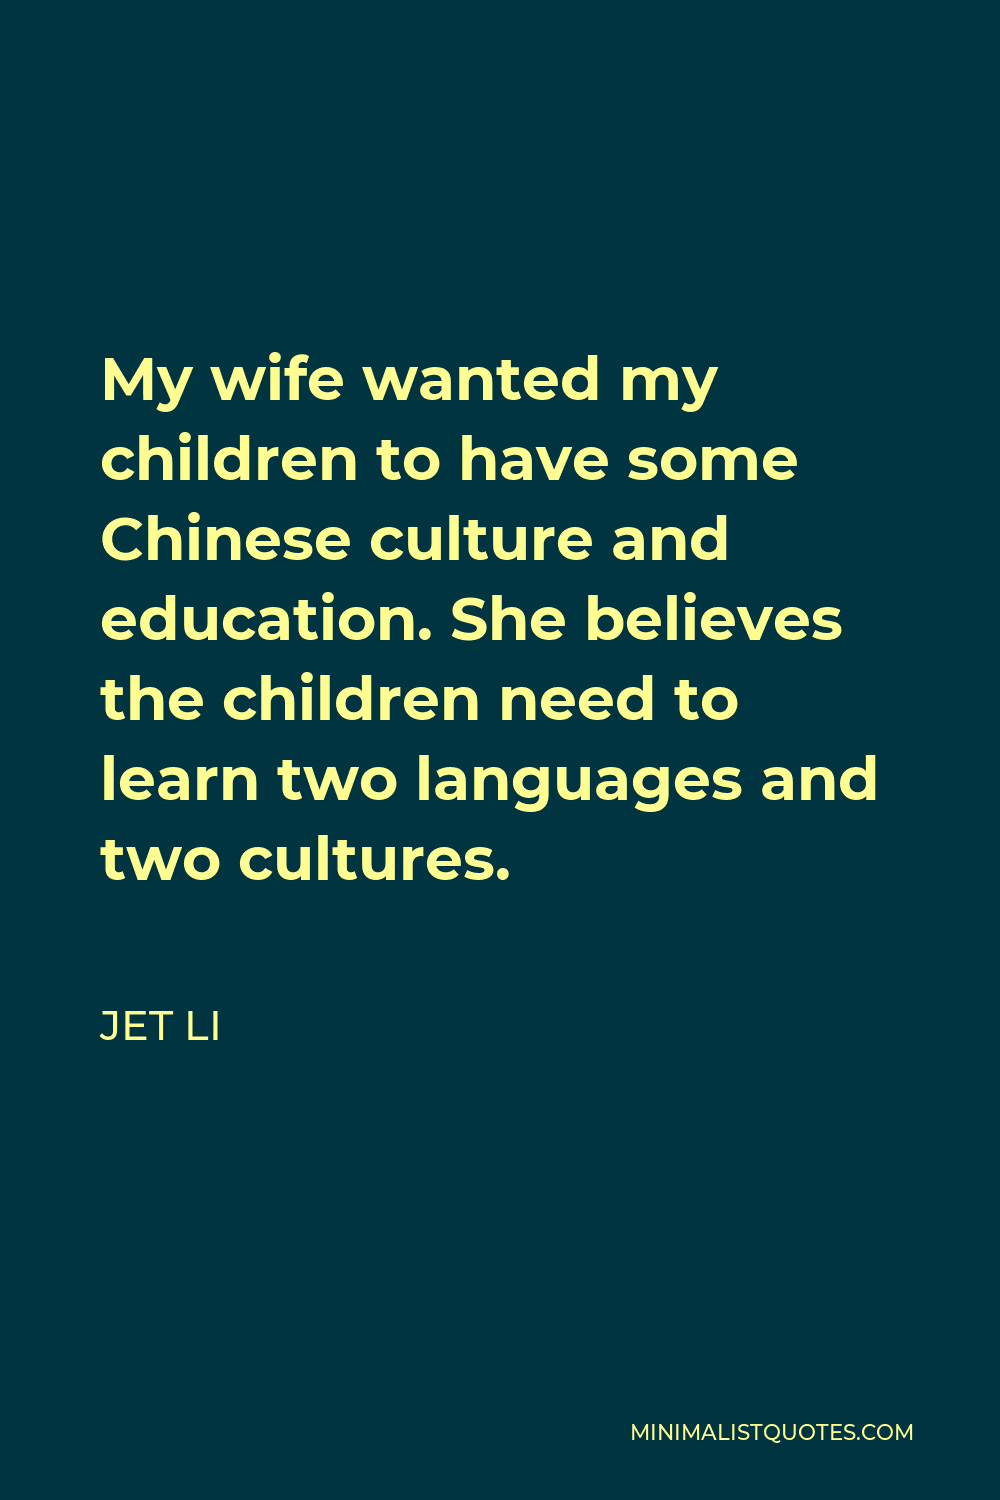 Jet Li Quote - My wife wanted my children to have some Chinese culture and education. She believes the children need to learn two languages and two cultures.